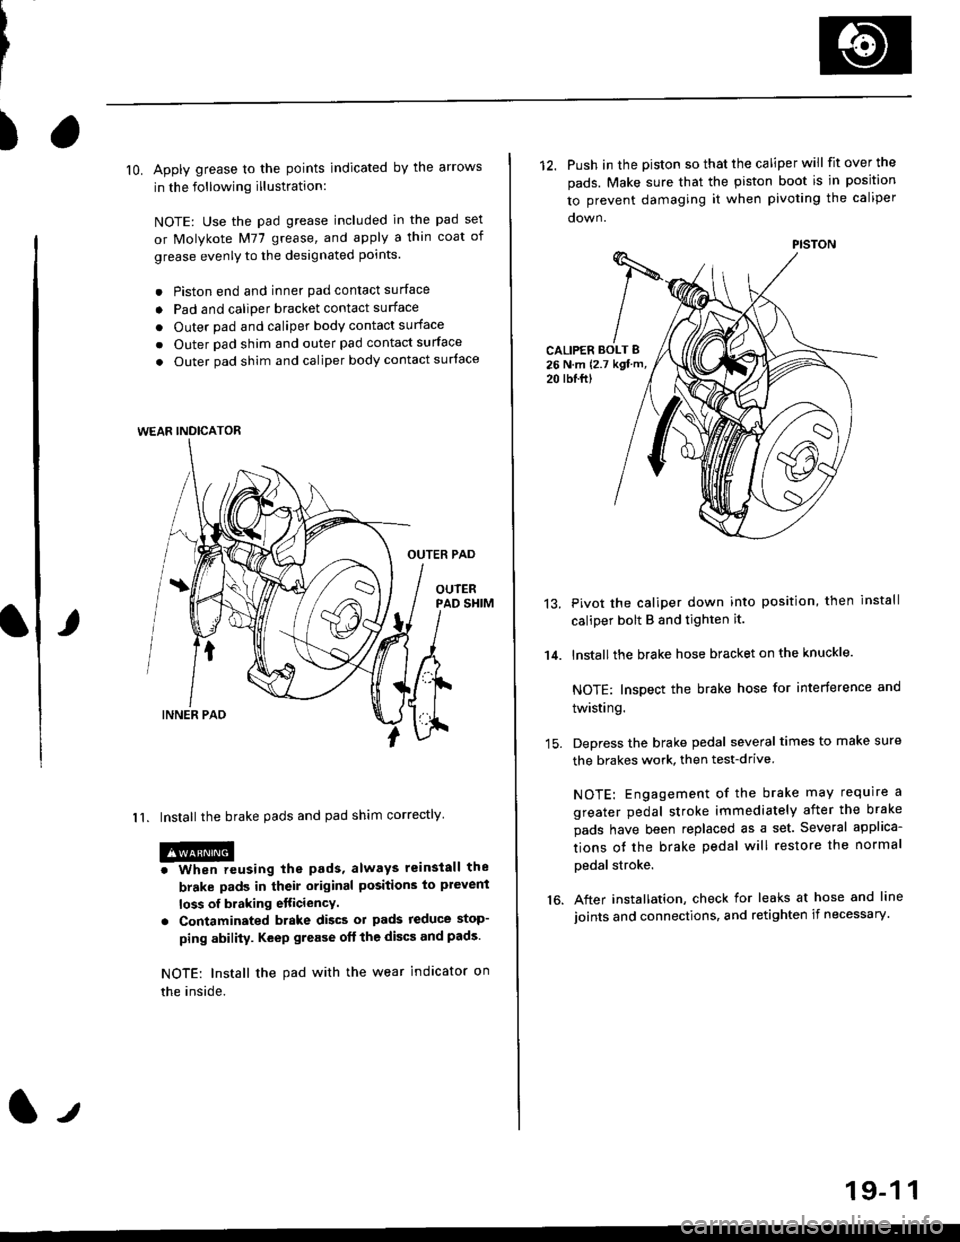 HONDA CIVIC 1999 6.G Workshop Manual )
lO. Apply grease to the points indicated by the arrows
in the following illustration:
NOTE: Use the pad grease included in the pad set
or Molykote M77 grease, and apply a thin coat of
grease evenly 